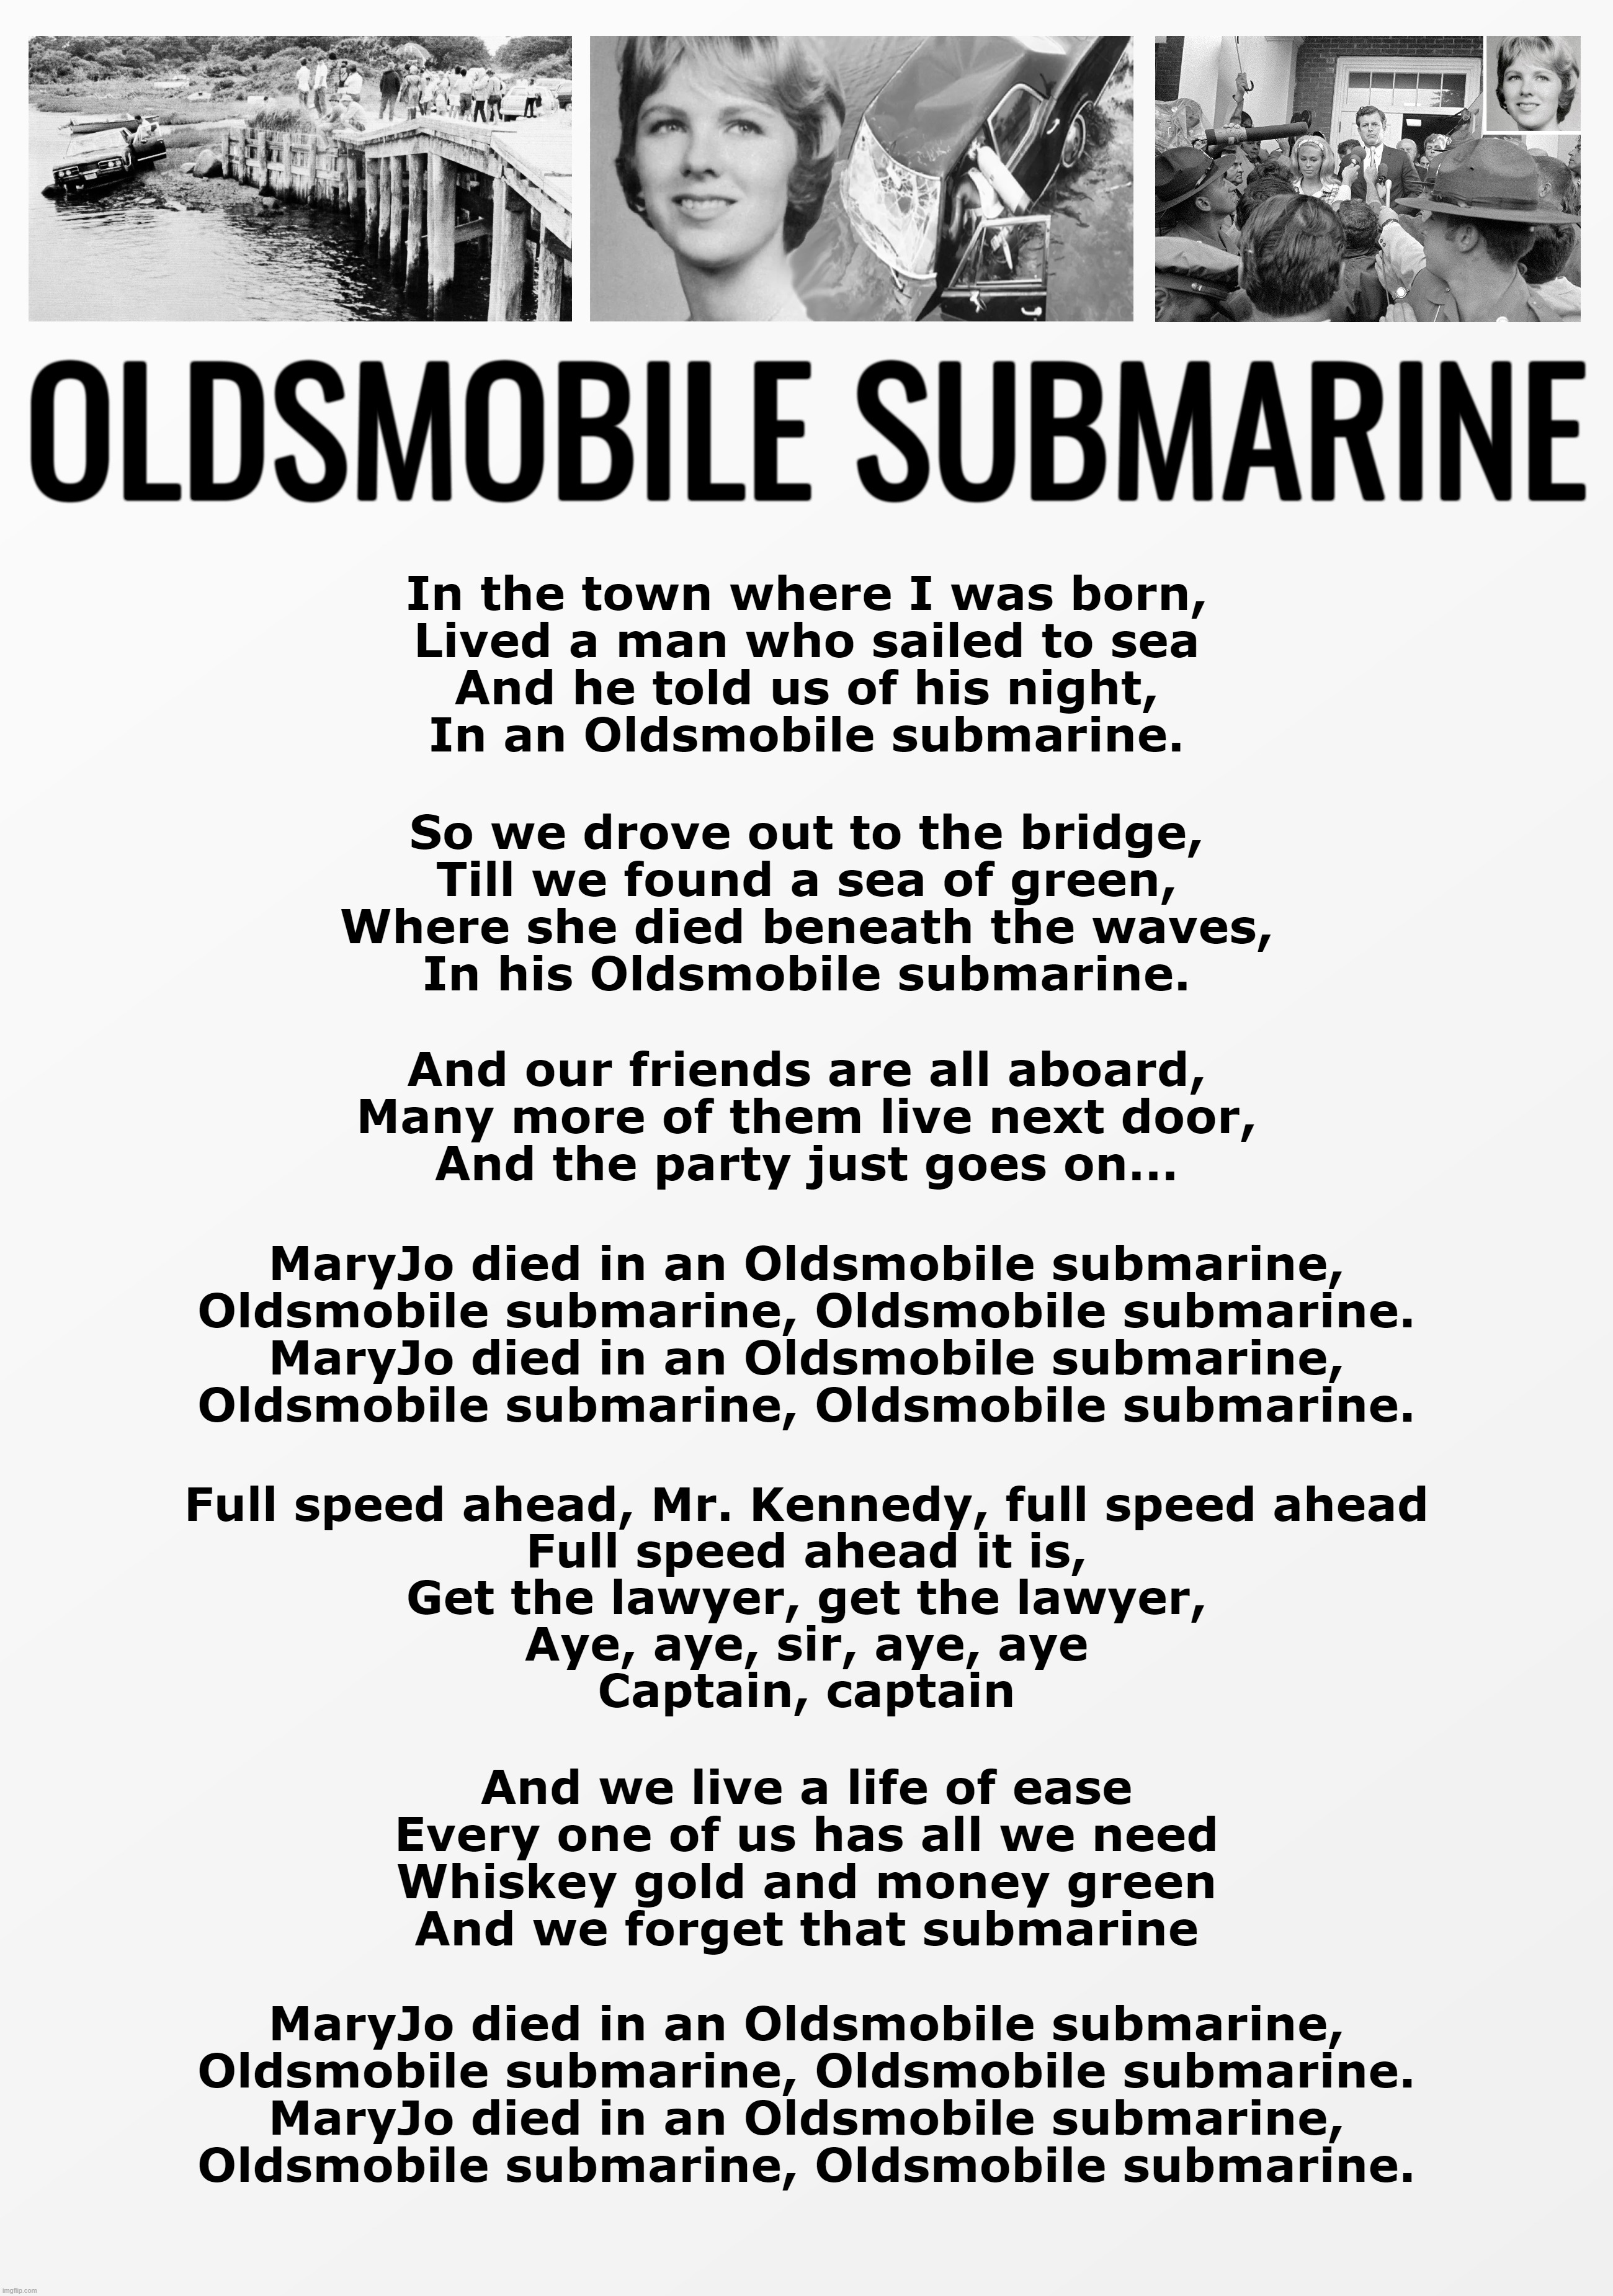 Oldsmobile Submarine . . . (Democratic Immunity) | OLDSMOBILE SUBMARINE; In the town where I was born,
Lived a man who sailed to sea
And he told us of his night,
In an Oldsmobile submarine. So we drove out to the bridge,
Till we found a sea of green,
Where she died beneath the waves,
In his Oldsmobile submarine. And our friends are all aboard,
Many more of them live next door,
And the party just goes on... MaryJo died in an Oldsmobile submarine,
Oldsmobile submarine, Oldsmobile submarine.
MaryJo died in an Oldsmobile submarine,
Oldsmobile submarine, Oldsmobile submarine. Full speed ahead, Mr. Kennedy, full speed ahead
Full speed ahead it is,
Get the lawyer, get the lawyer,
Aye, aye, sir, aye, aye
Captain, captain; And we live a life of ease
Every one of us has all we need
Whiskey gold and money green
And we forget that submarine; MaryJo died in an Oldsmobile submarine,
Oldsmobile submarine, Oldsmobile submarine.
MaryJo died in an Oldsmobile submarine,
Oldsmobile submarine, Oldsmobile submarine. | image tagged in politics,political meme,democrats,parody,mary jo kopechne | made w/ Imgflip meme maker